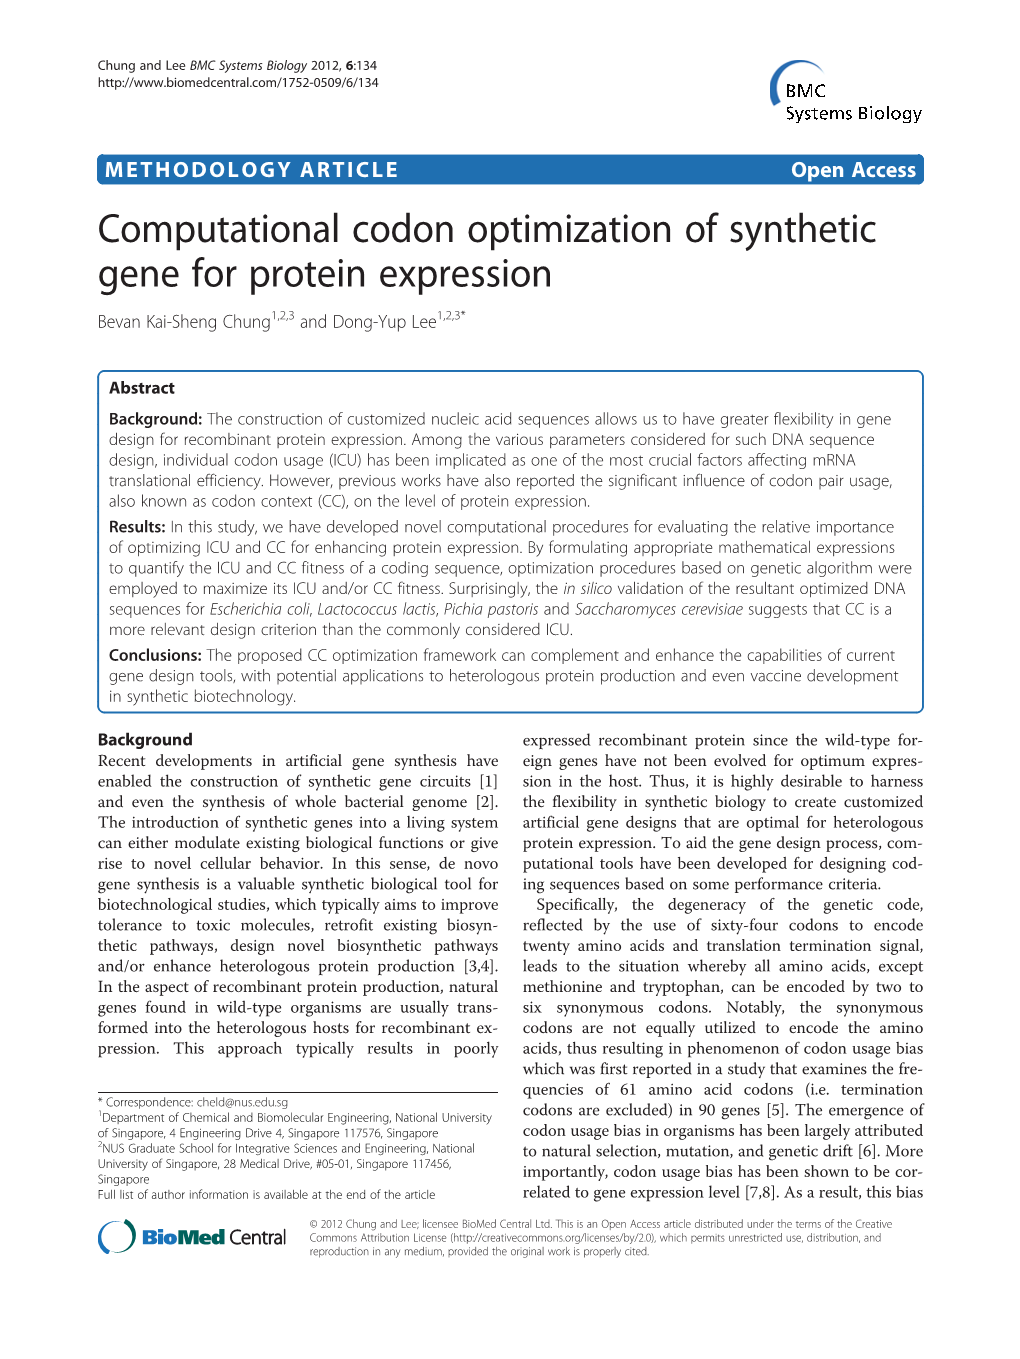 Computational Codon Optimization of Synthetic Gene for Protein Expression Bevan Kai-Sheng Chung1,2,3 and Dong-Yup Lee1,2,3*